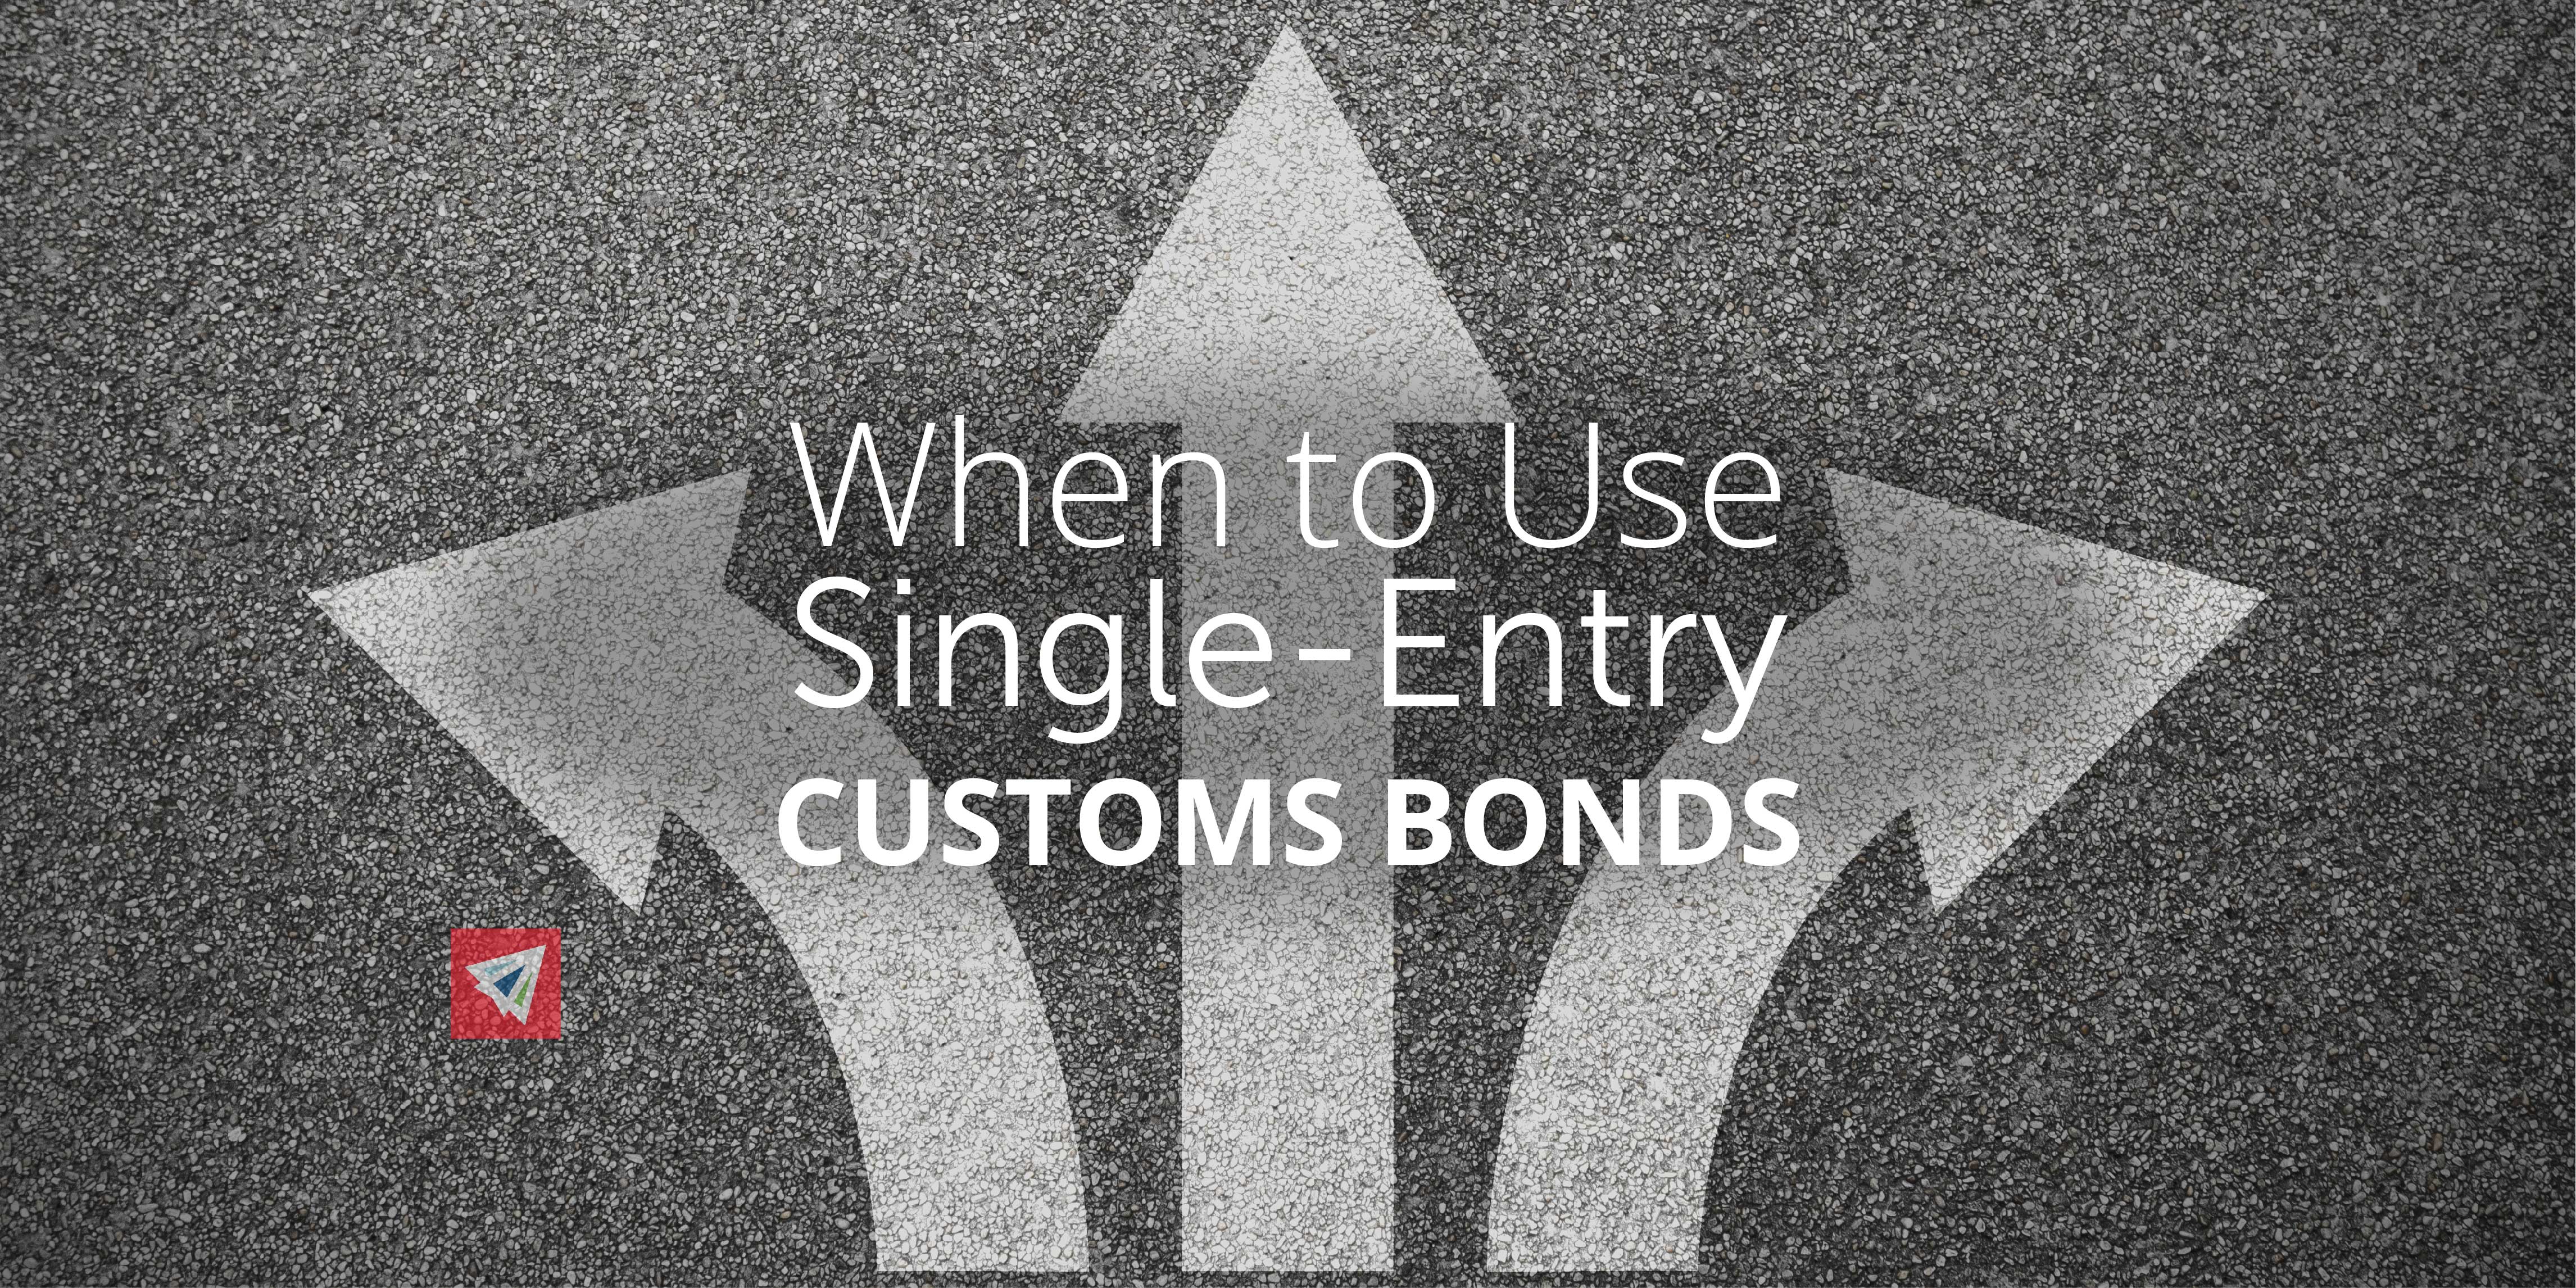 When to Use Single-Entry Customs Bonds